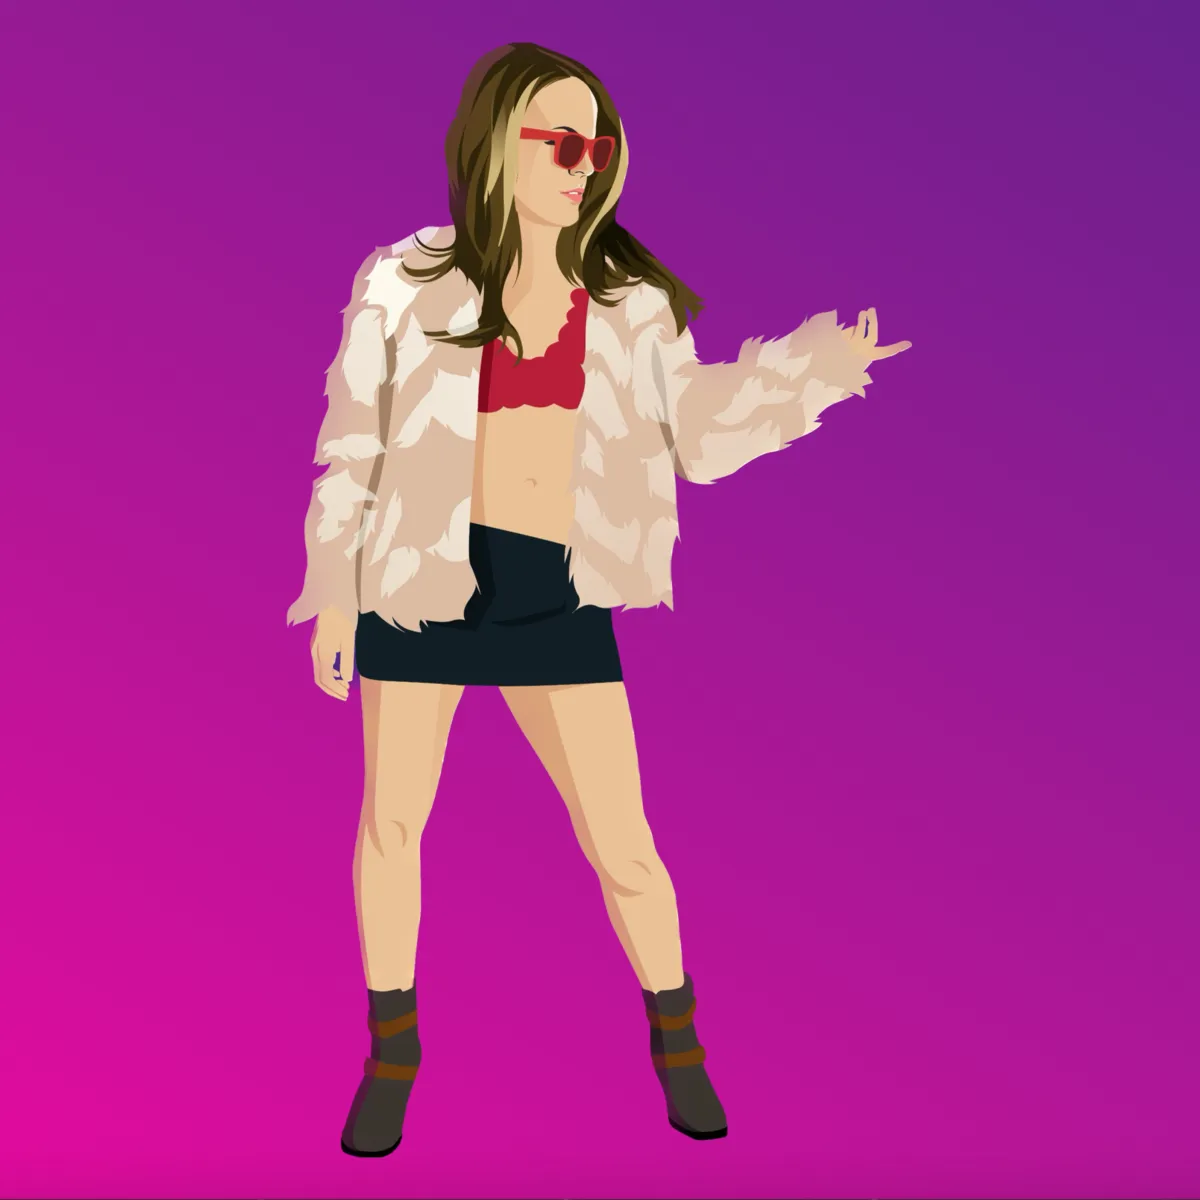 Cartoon-styled image mimicking oil painting of political anti-pop singer-songwriter Abby London, characterized by her striking pose, capturing her dynamic persona and artistic style.